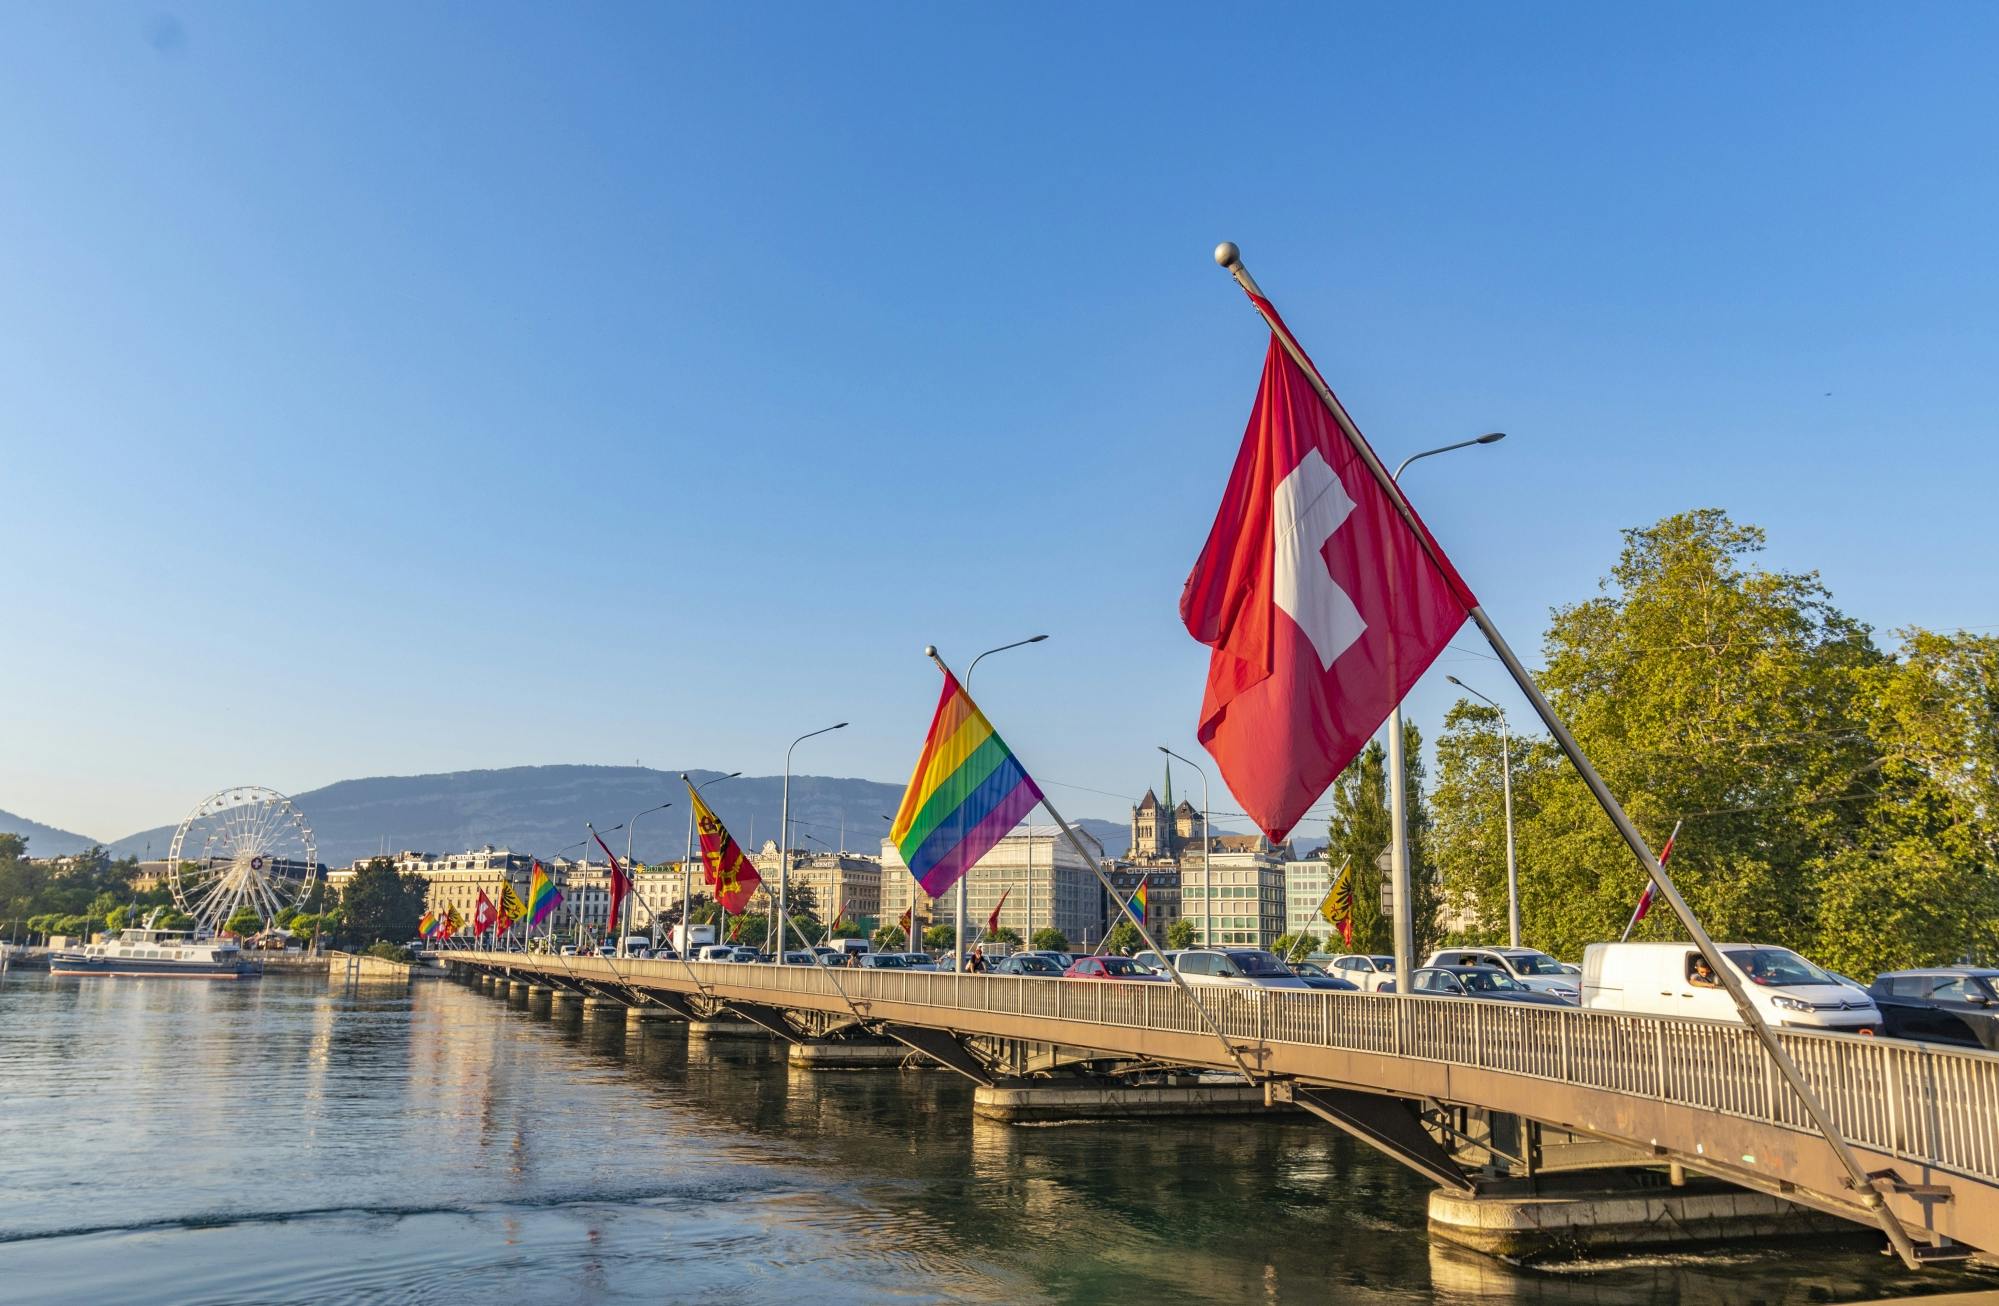 Walking tour of Geneva's best photo spots with a local